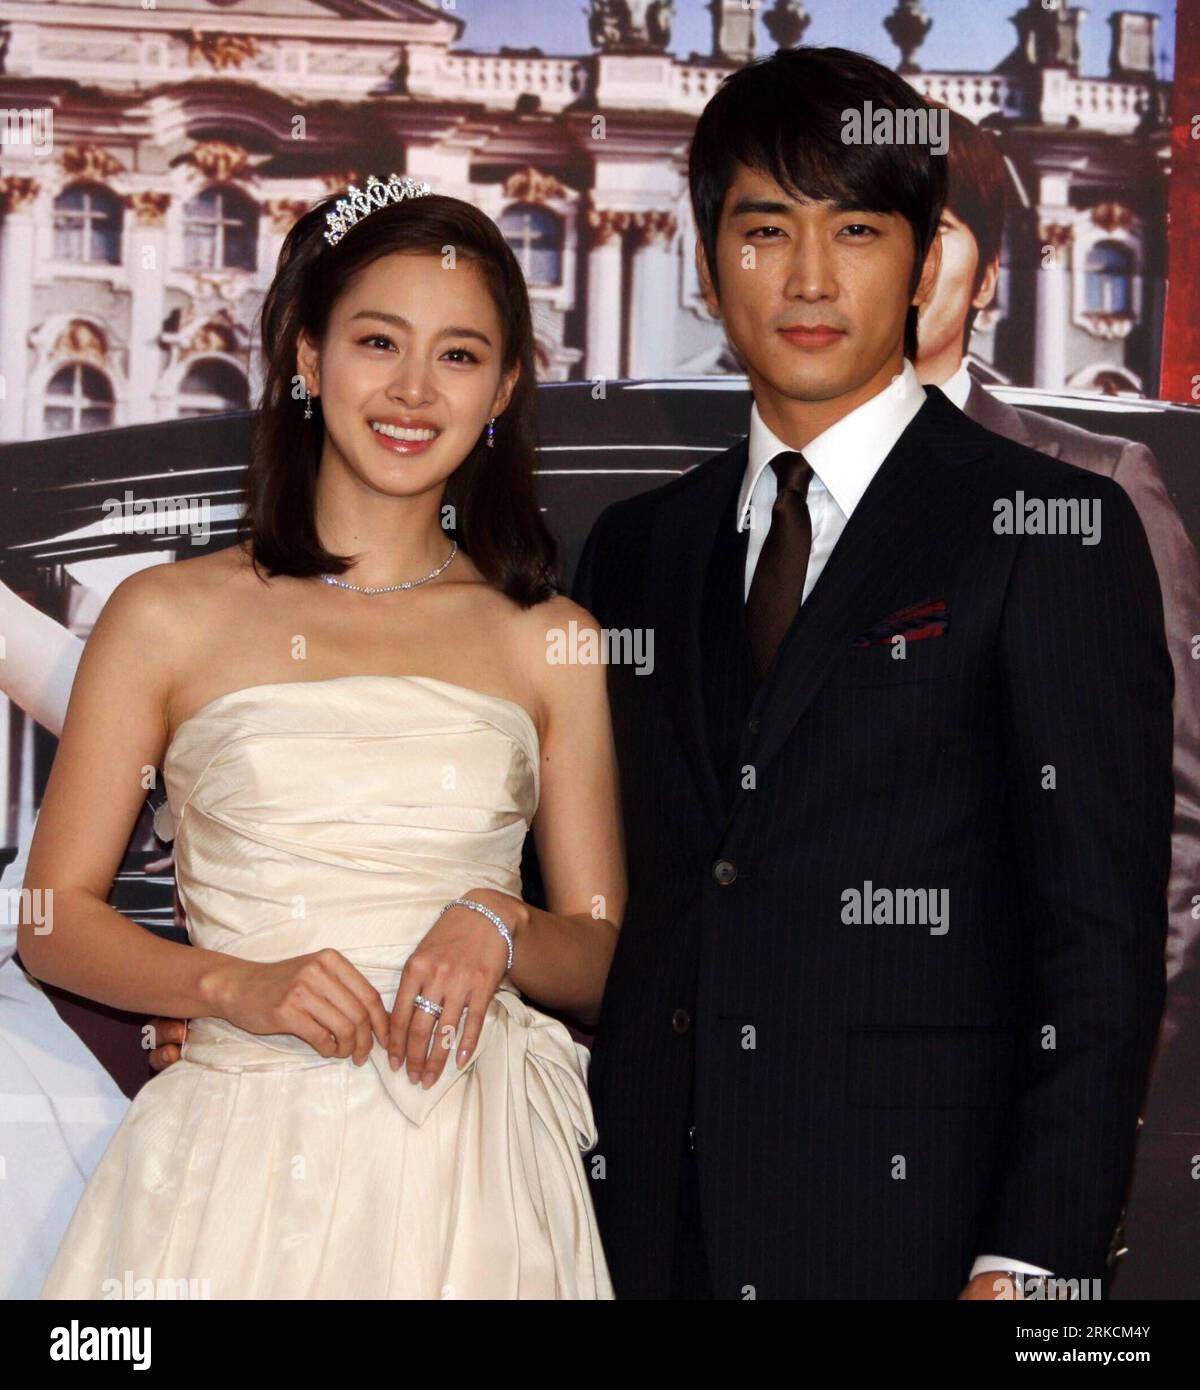 Bildnummer: 54780826  Datum: 03.01.2011  Copyright: imago/Xinhua (110103) -- SEOUL, Jan. 3, 2011 (Xinhua) -- South Korean actress Kim Tae Hee and actor Song Seung Hun take parts in a preview event of the new TV series My Princess in Seoul, South Korea, Jan. 3, 2011. My Princess will be on show since Jan. 5, 2011. (Xinhua/He Lulu) (yc) SOUTH KOREA-SEOUL-TV SERIES PUBLICATIONxNOTxINxCHN Entertainment People Film TV kbdig xsp 2011 quadrat     Bildnummer 54780826 Date 03 01 2011 Copyright Imago XINHUA  Seoul Jan 3 2011 XINHUA South Korean actress Kim Tae Hee and Actor Song Seung HUN Take Parts in Stock Photo